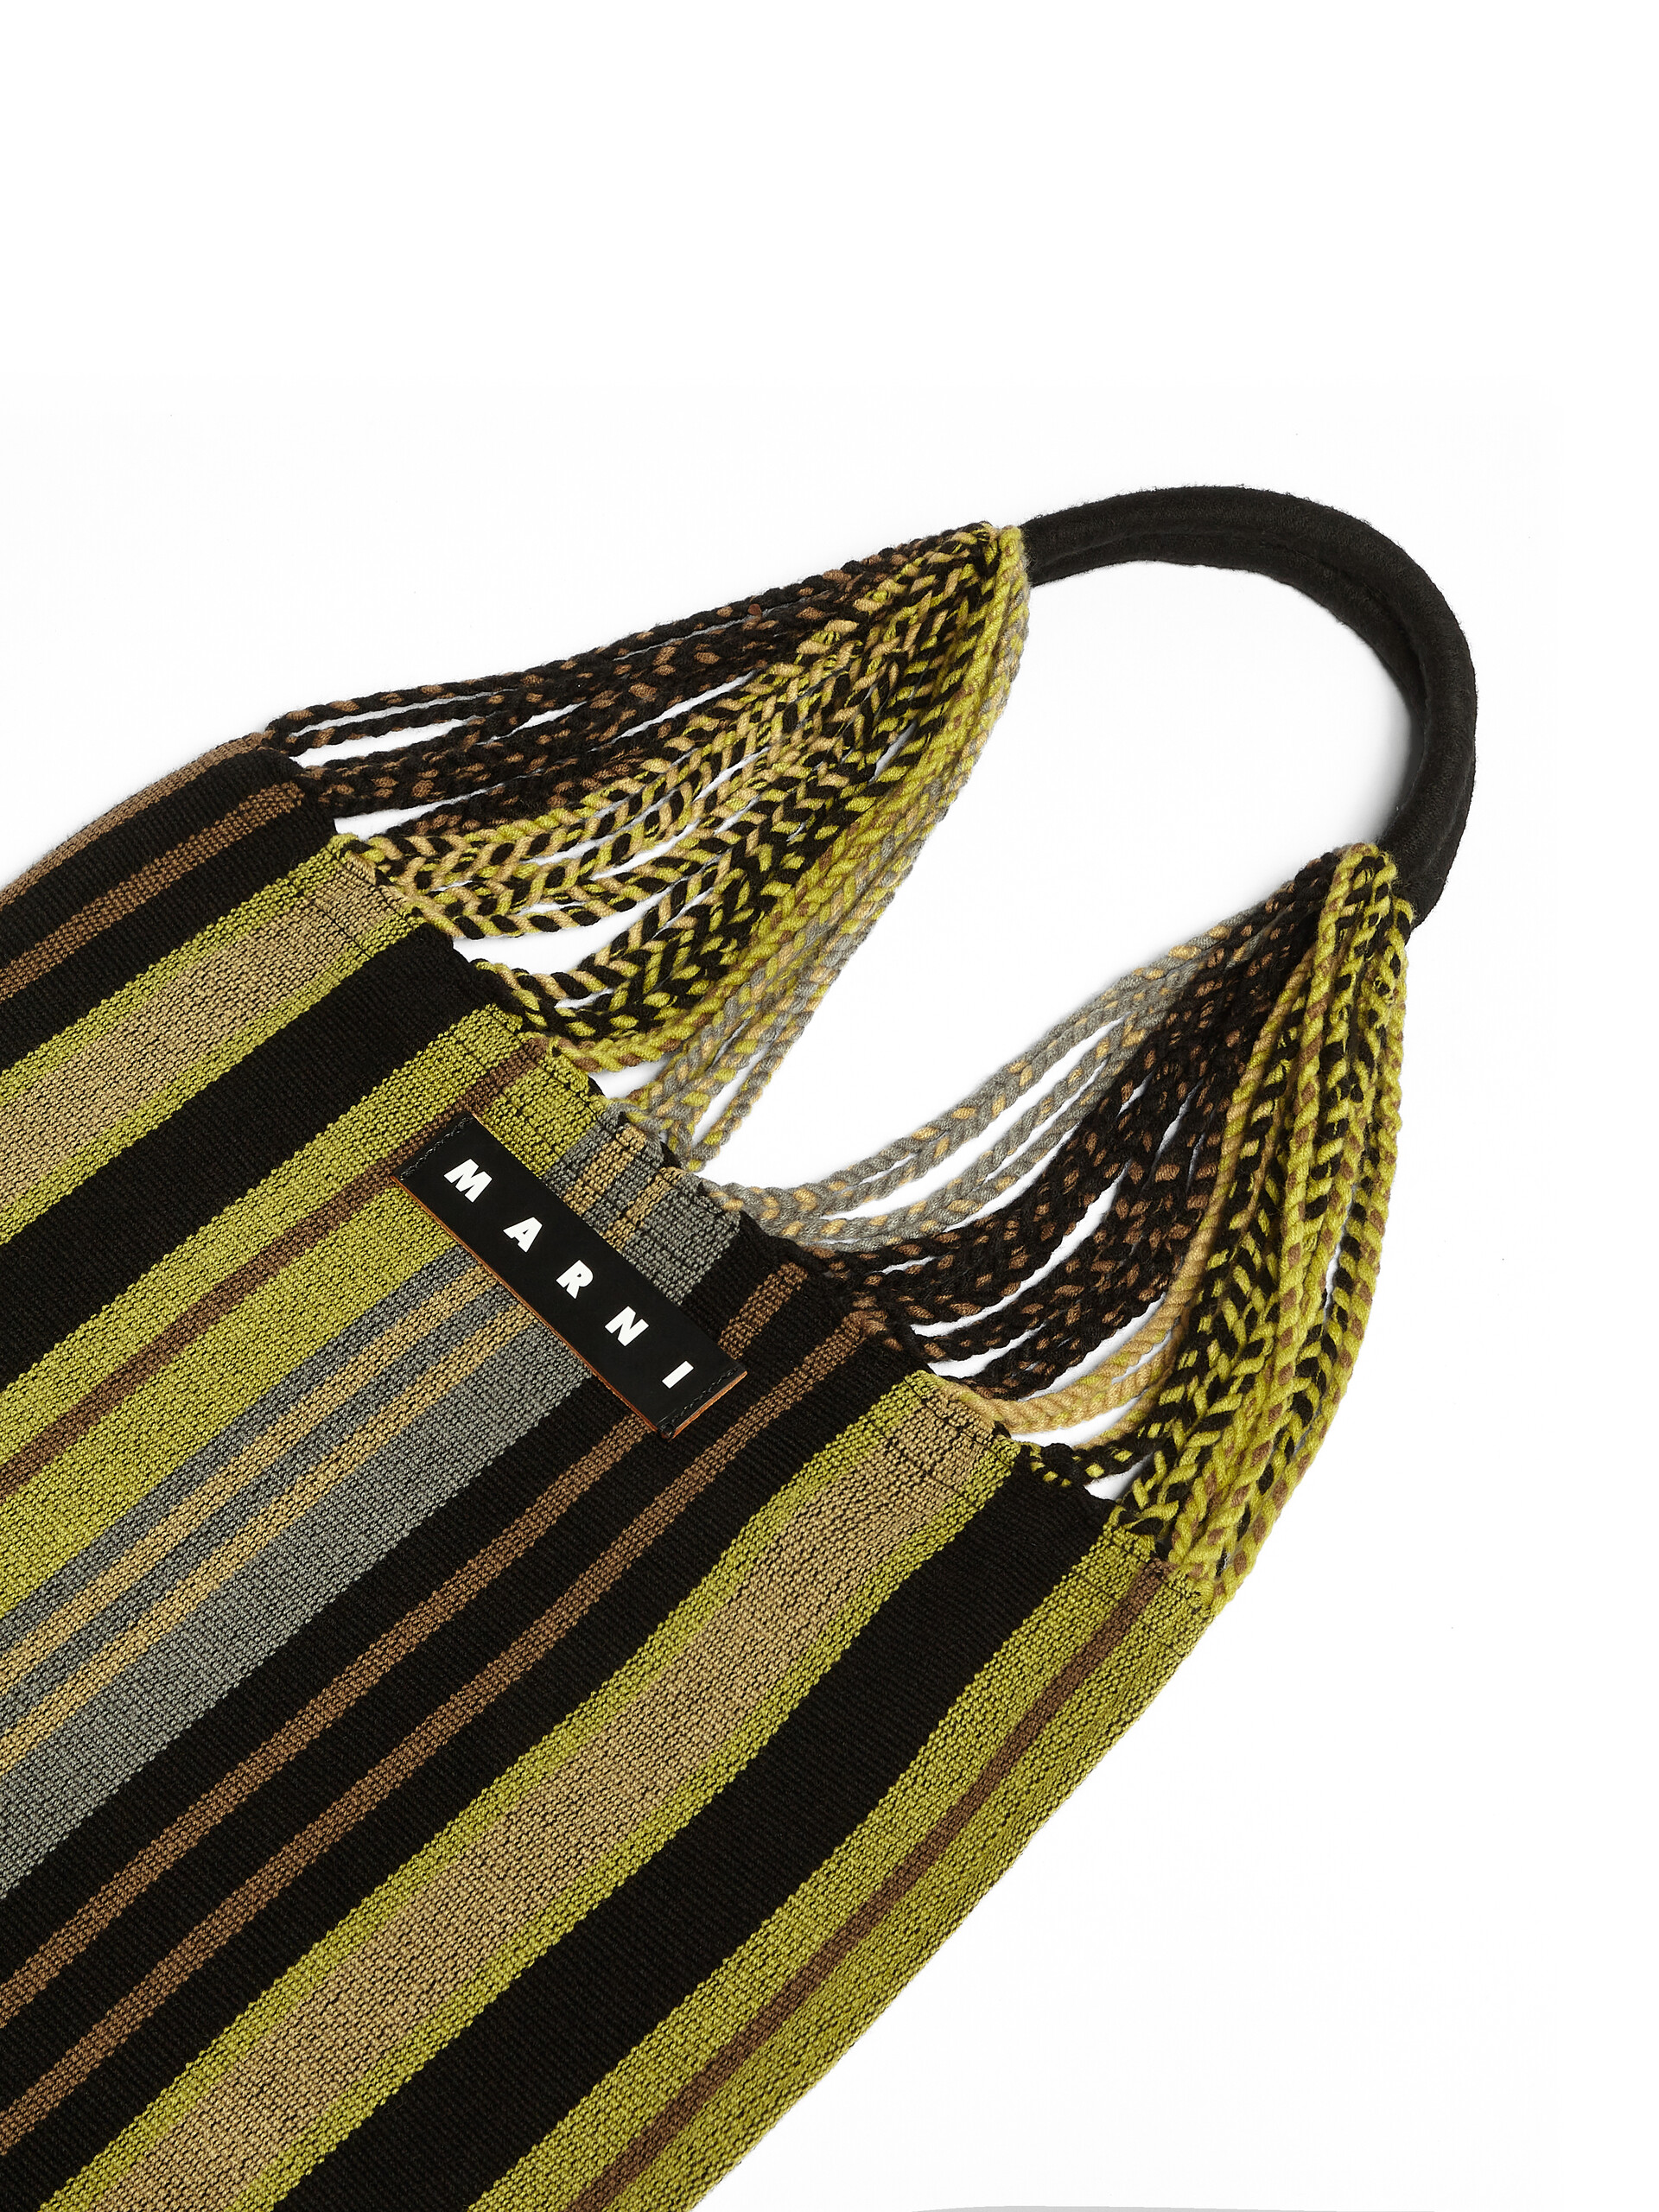 MARNI MARKET HAMMOCK bag in yellow multicolour polyester - Bags - Image 4